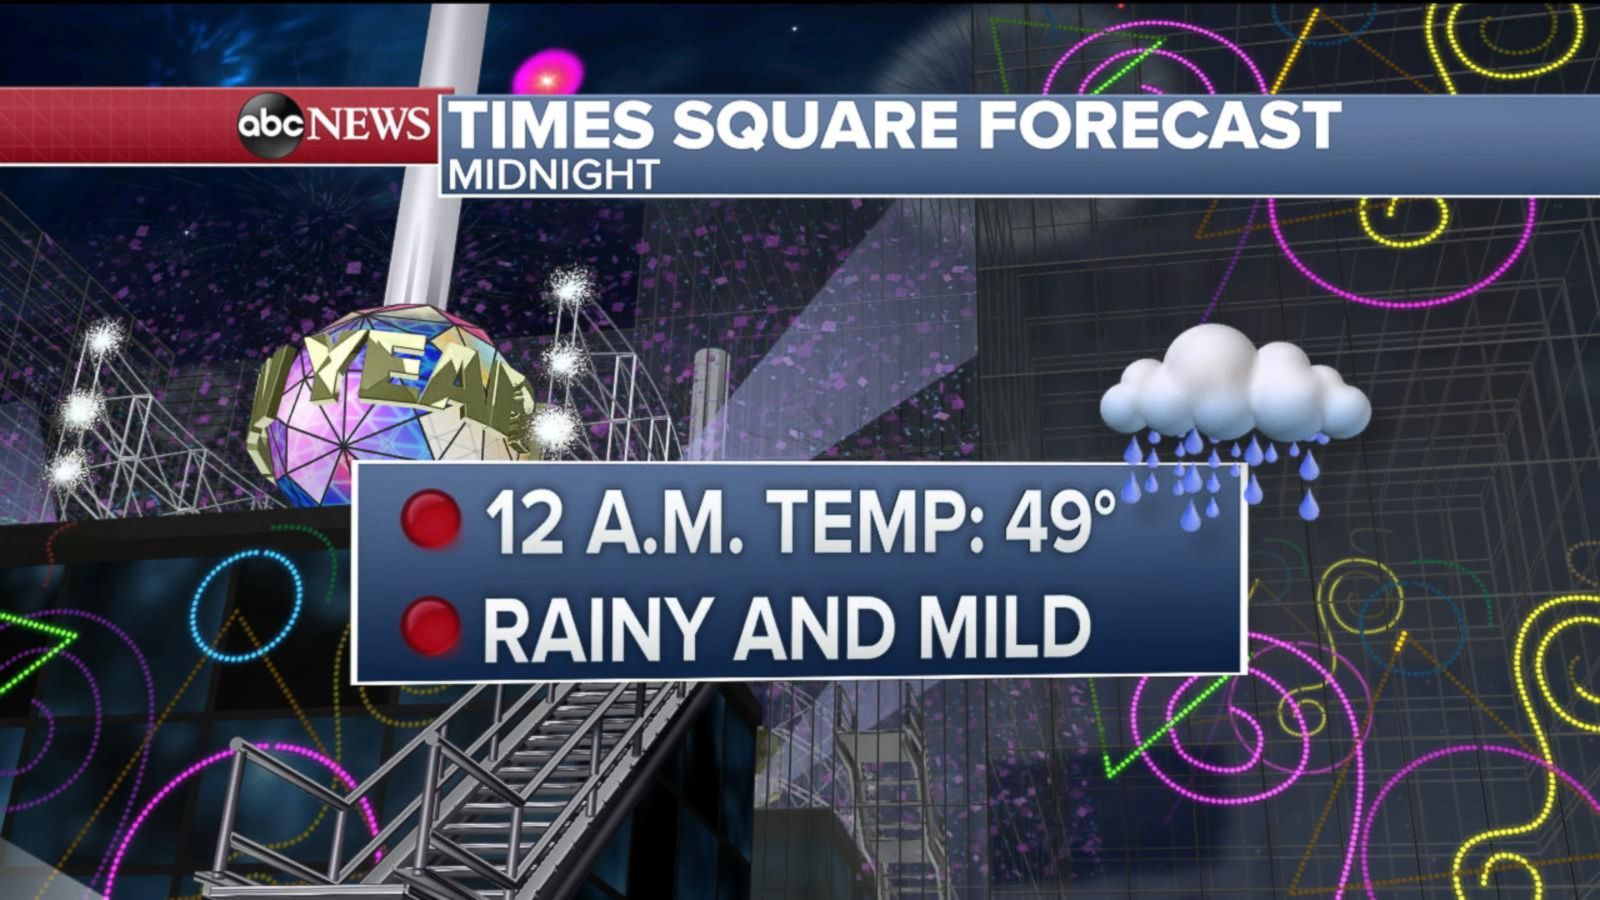 VIDEO: Storm to bring rain, wind to New Year's revelers in Times Square